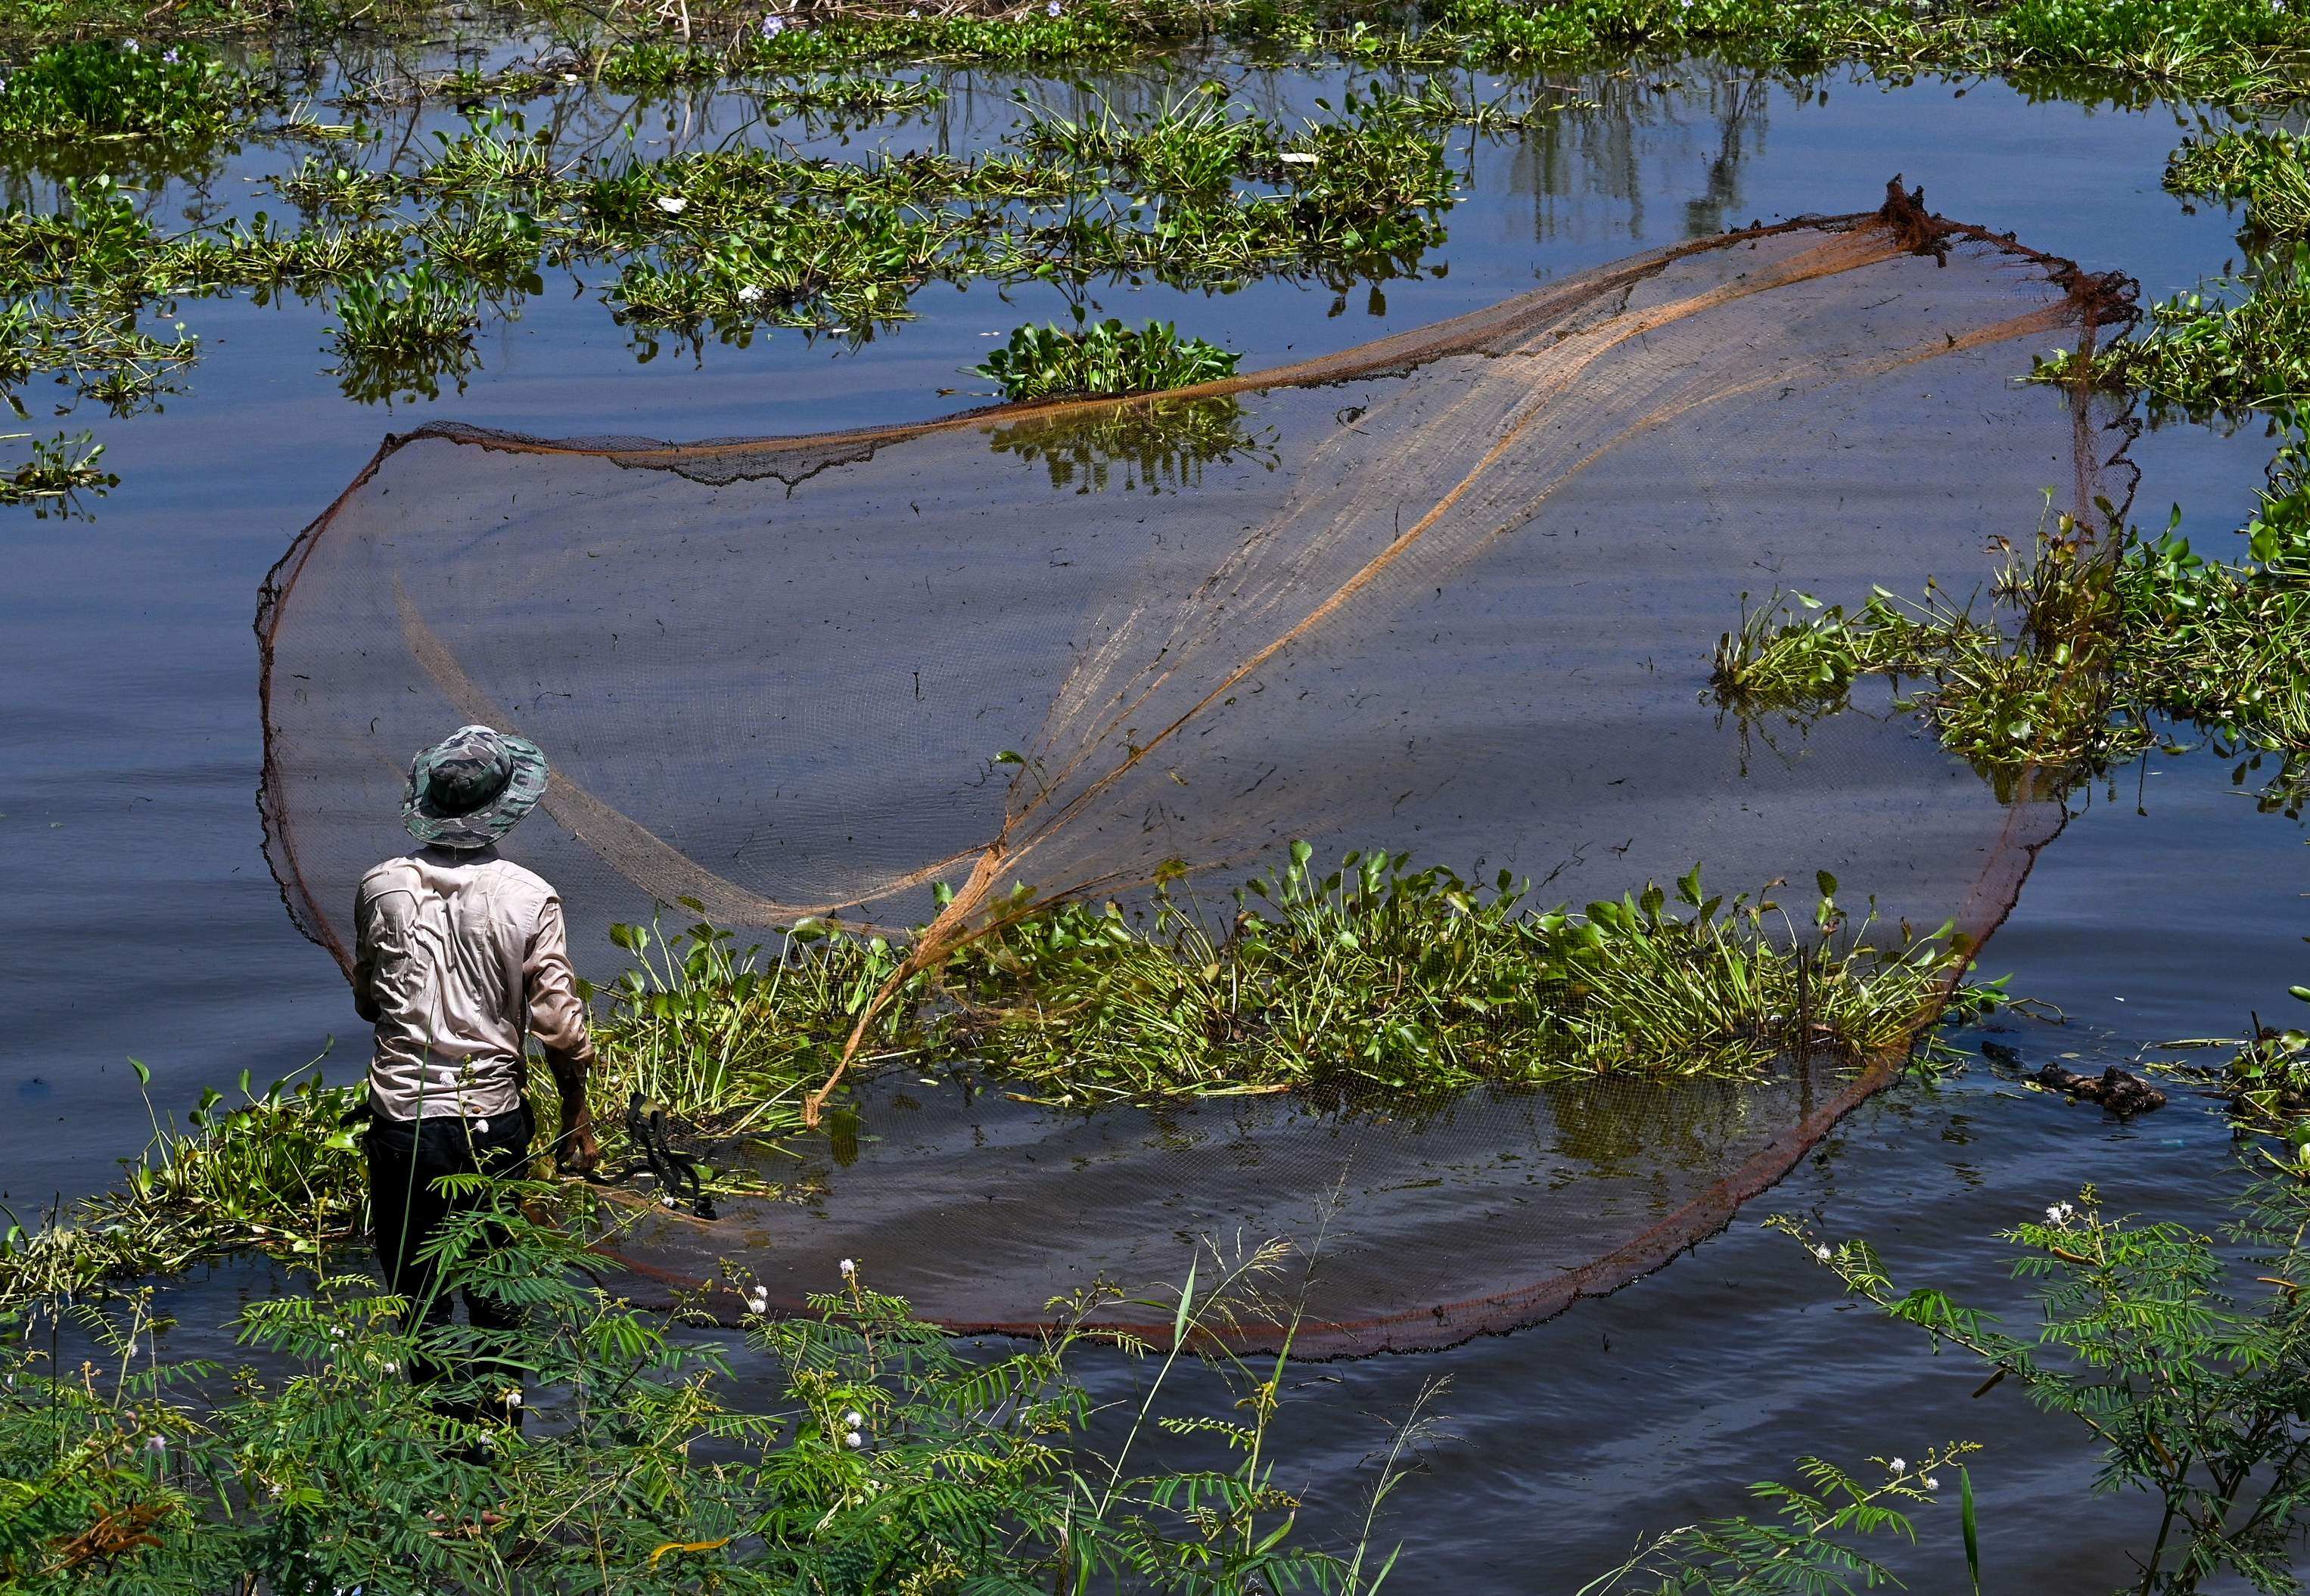 Mekong River's declining fish species an 'urgent wake-up call' for action,  conservationists say